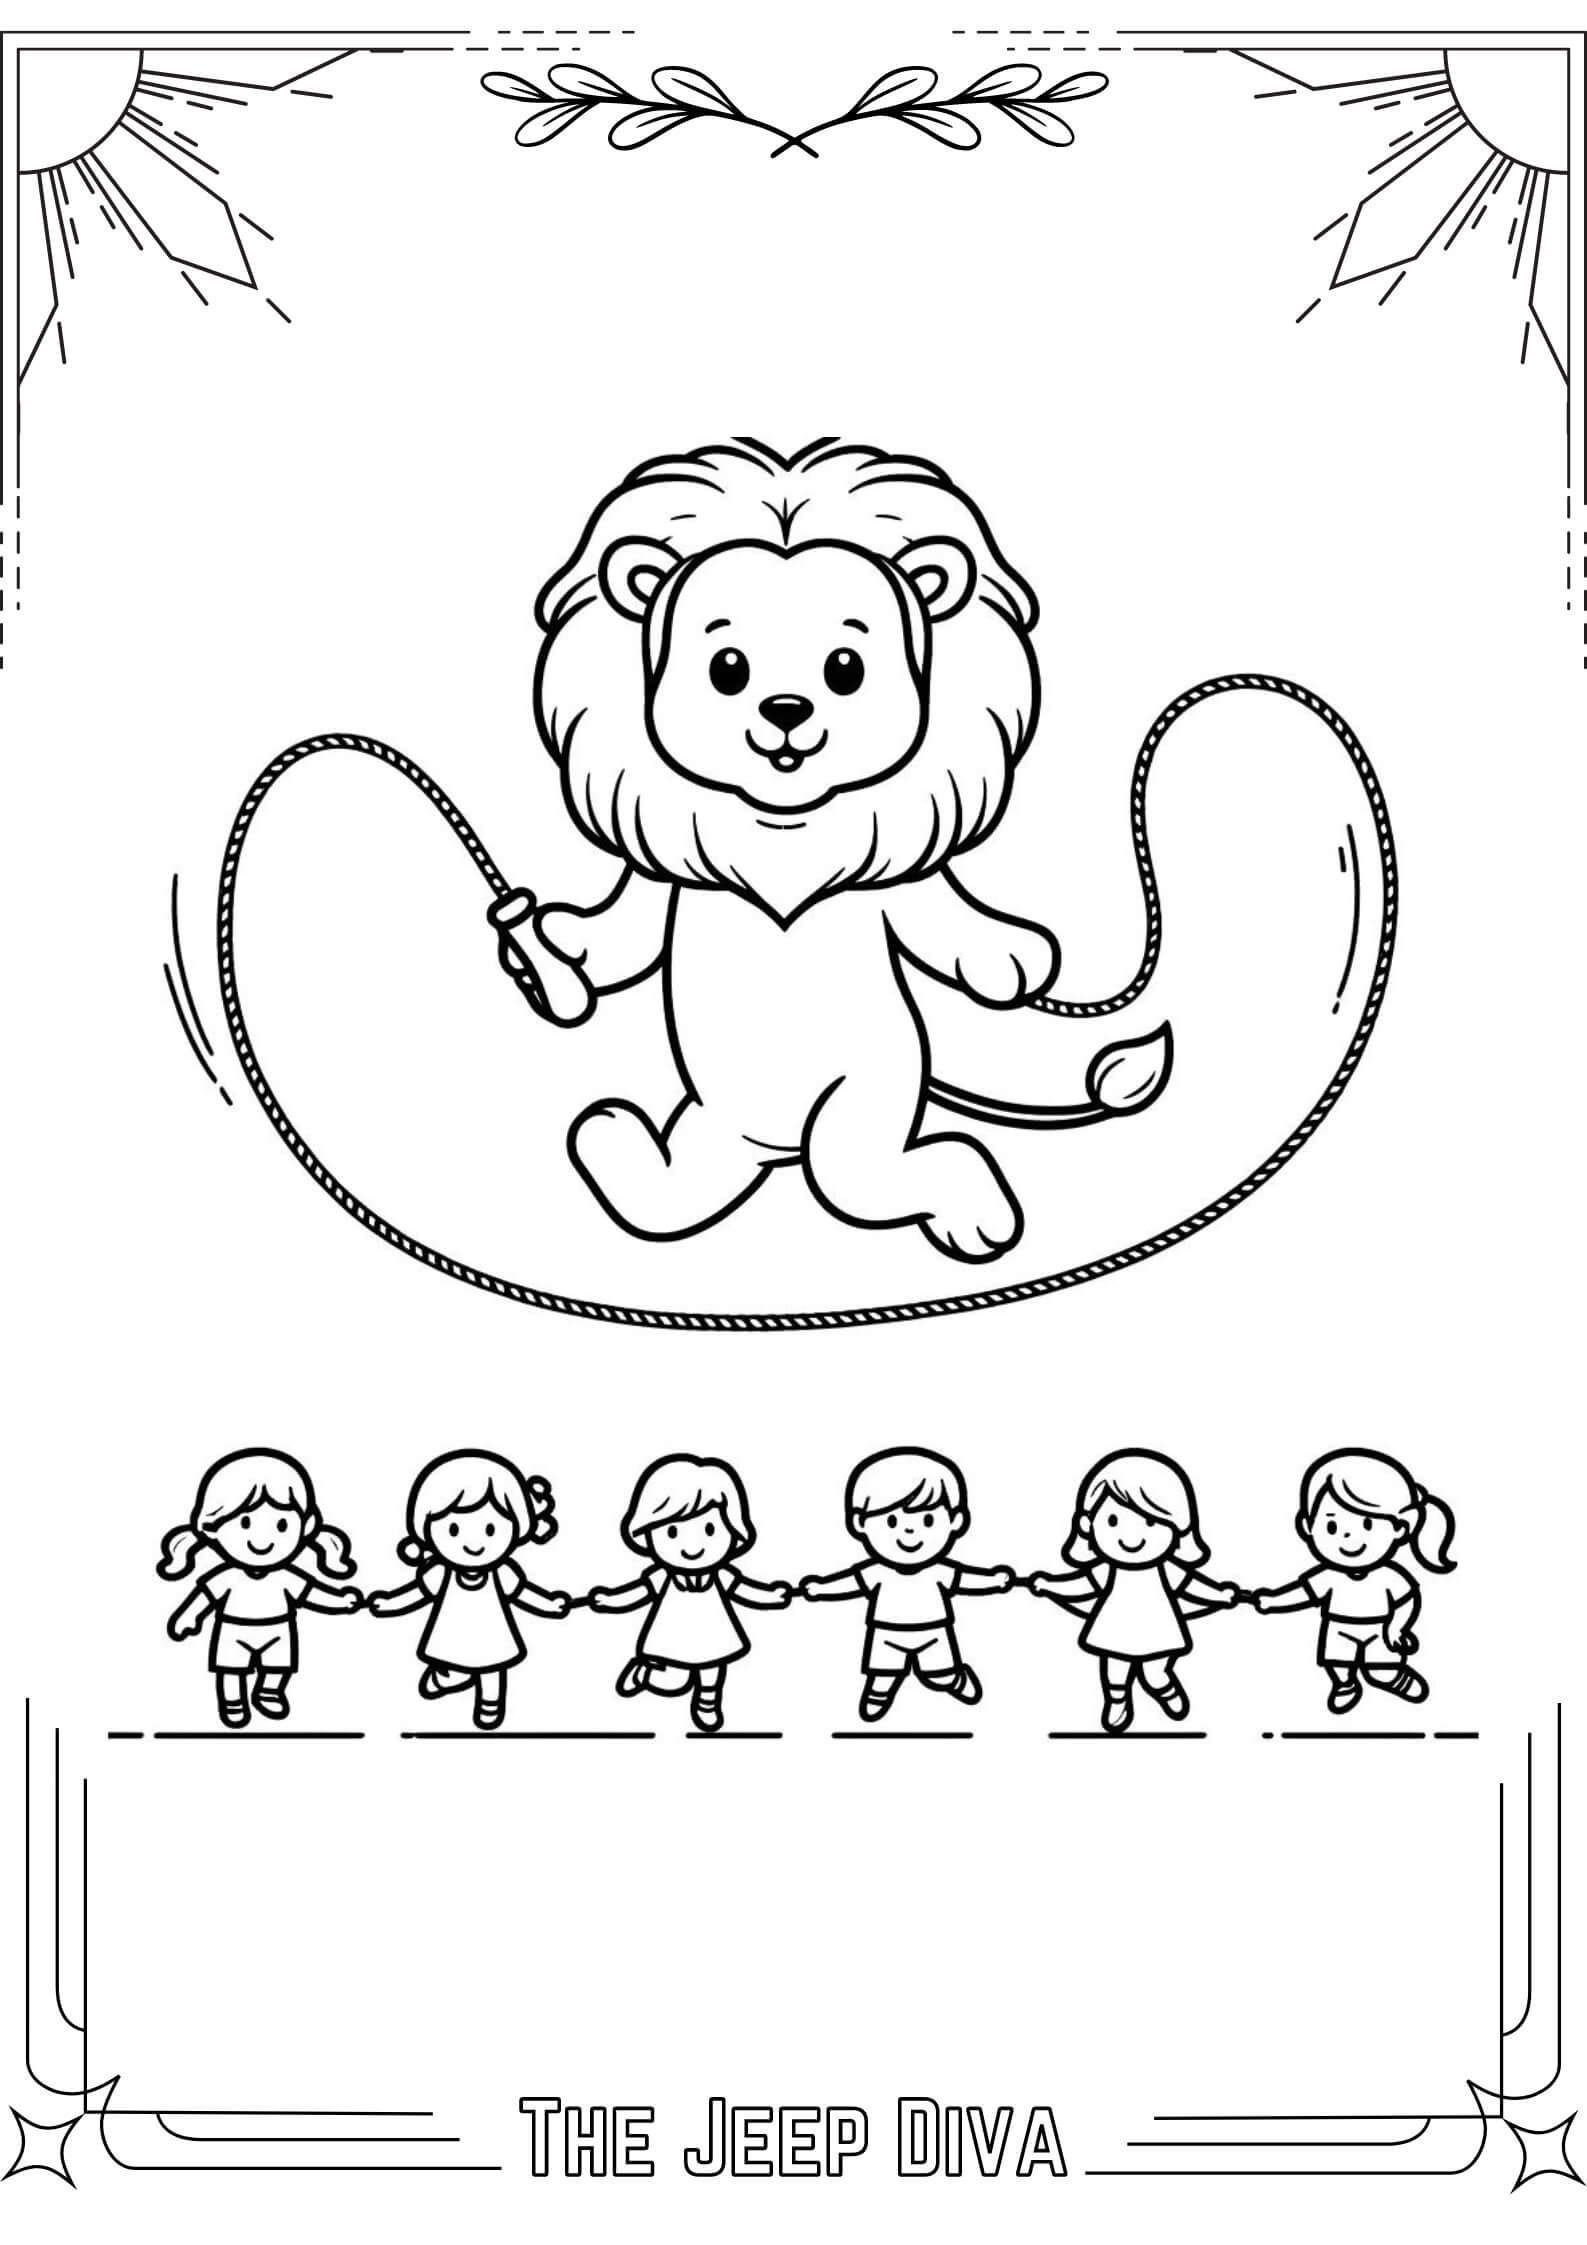 The Jeep Diva Coloring Page Lion Medium Difficulty 11